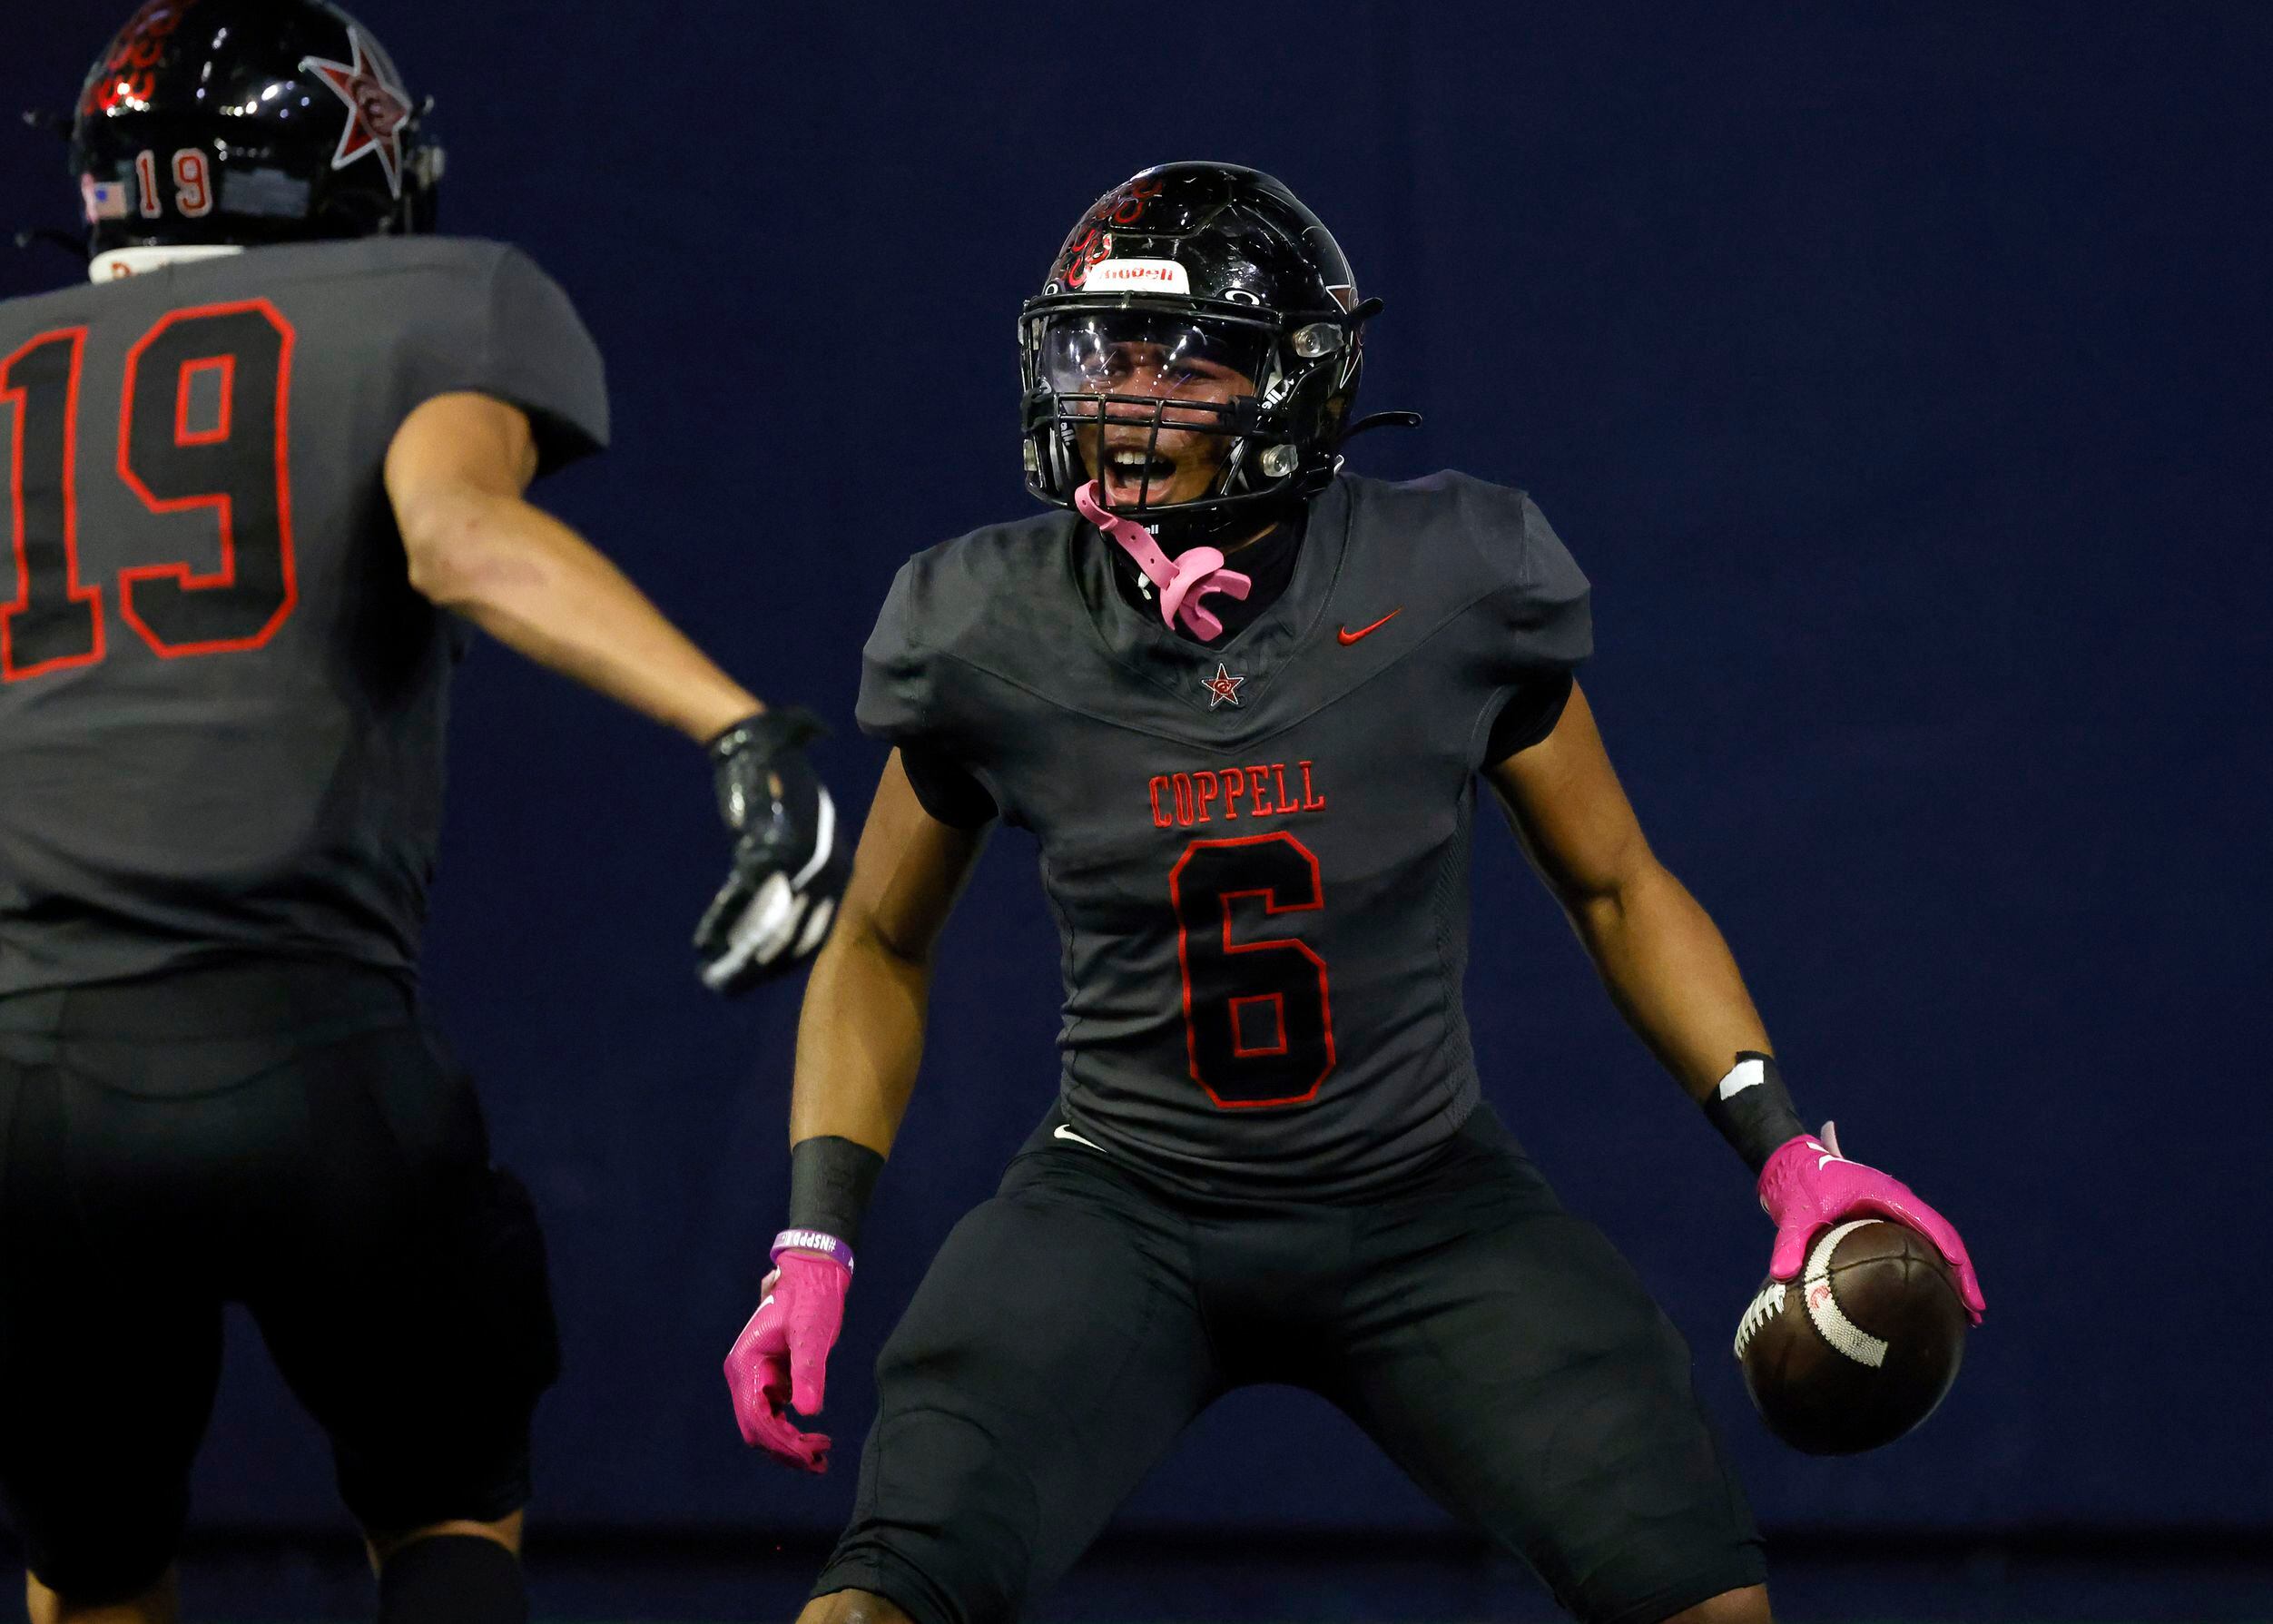 Coppell running back O’Marion Mbakwe (6) celebrates his fourth quarter touchdown run against...